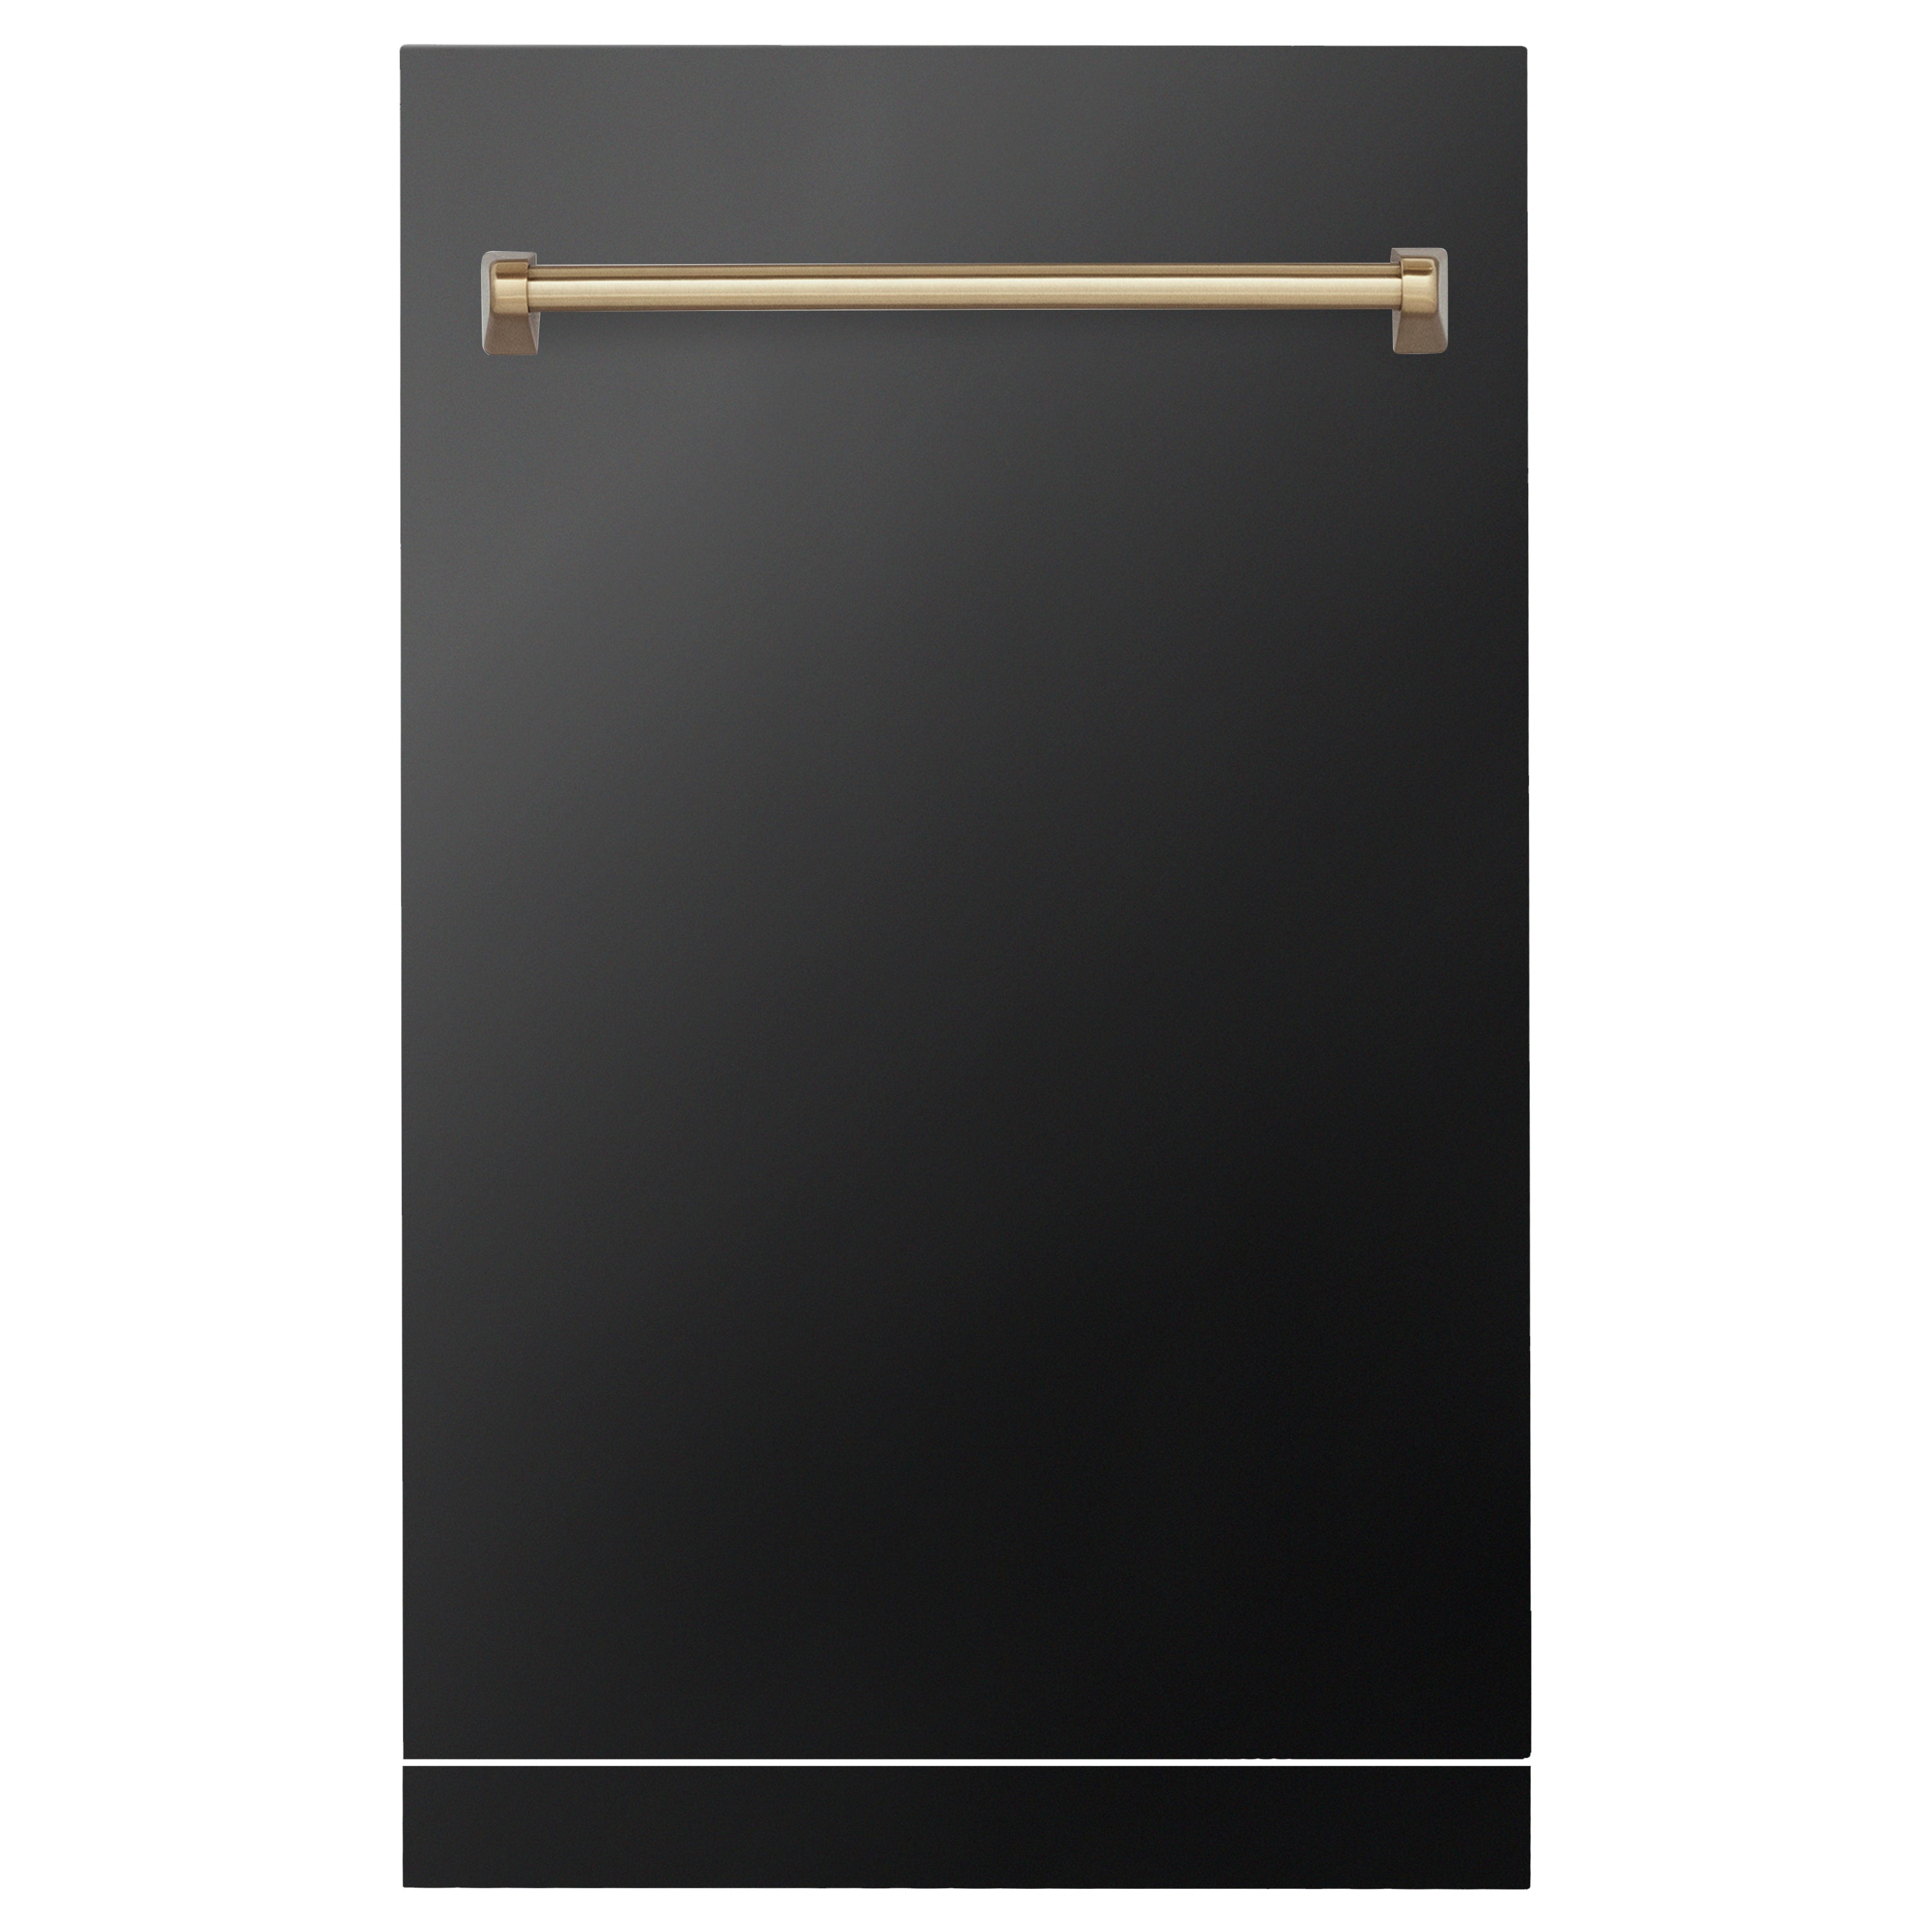 ZLINE 18" Autograph Edition Tallac Dishwasher Panel in Black Stainless Steel with Champagne Bronze Handle (DPVZ-BS-18-CB)